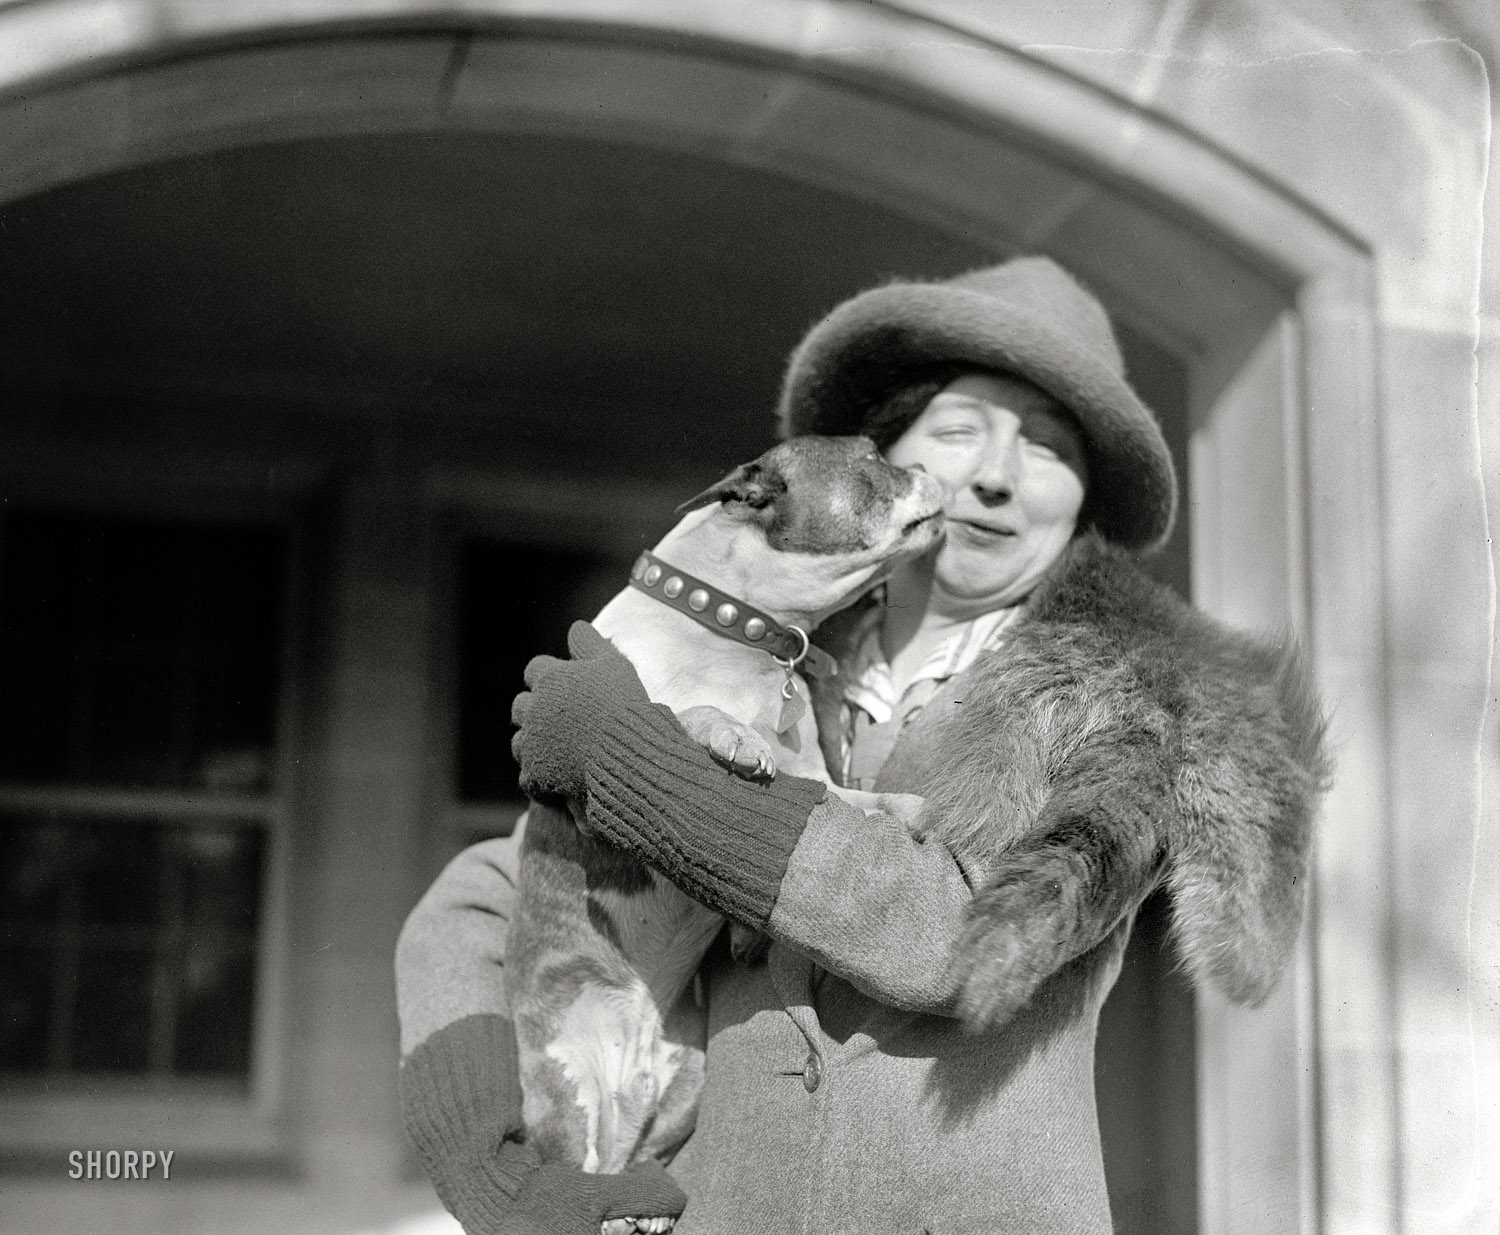 January 14, 1920. Washington, D.C "Margaret Bell Saunders." Be a good boy and Mama won't have you turned into a coat! National Photo Co. glass negative. View full size.